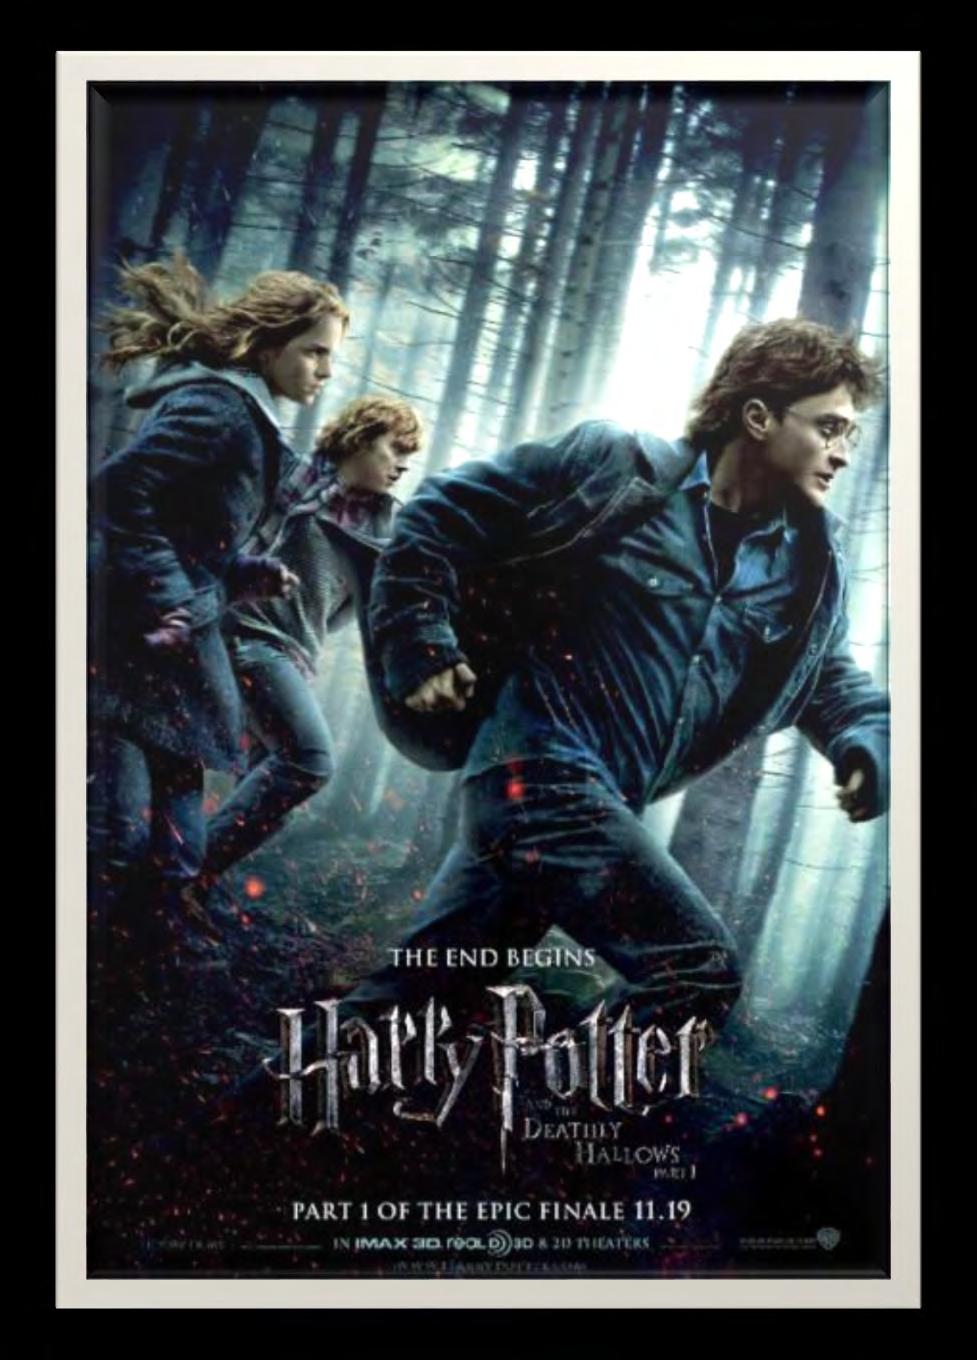 The Main Poster This poster depicts the three main Harry Potter characters running away from something. It is a very exciting and dynamic freeze frame and thus shows off the film s action elements.